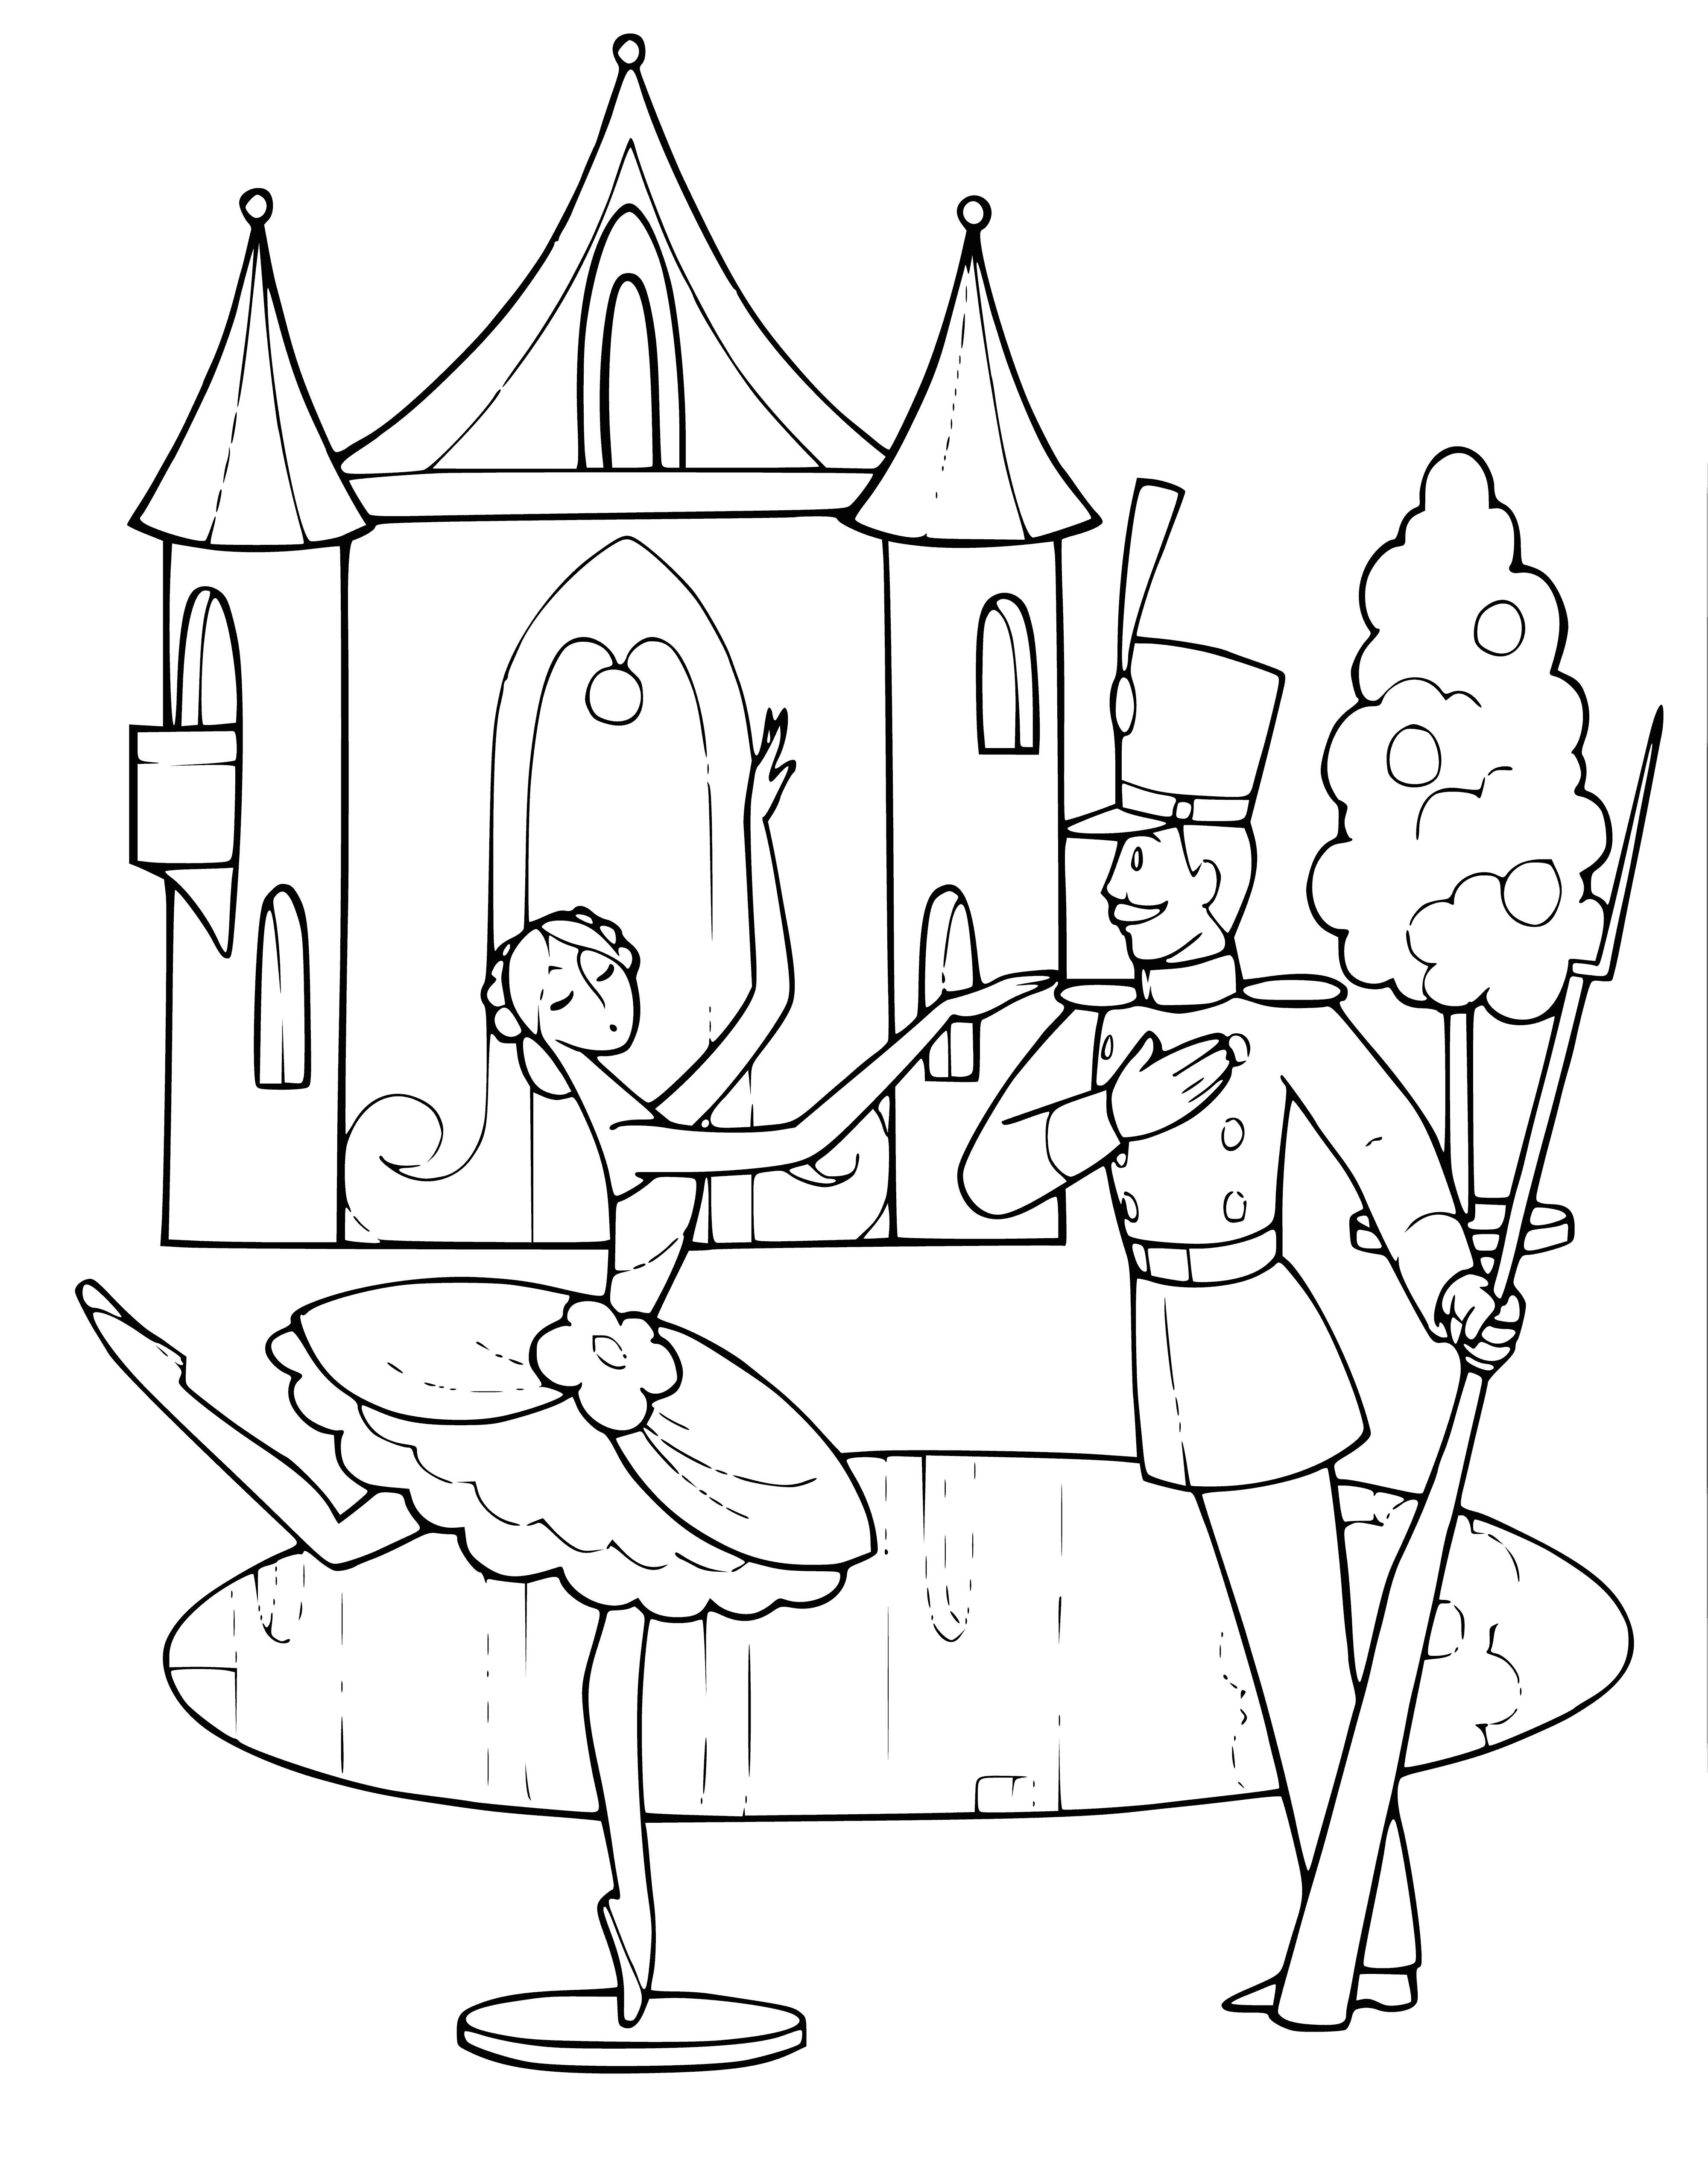 Soldier and dancer coloring page